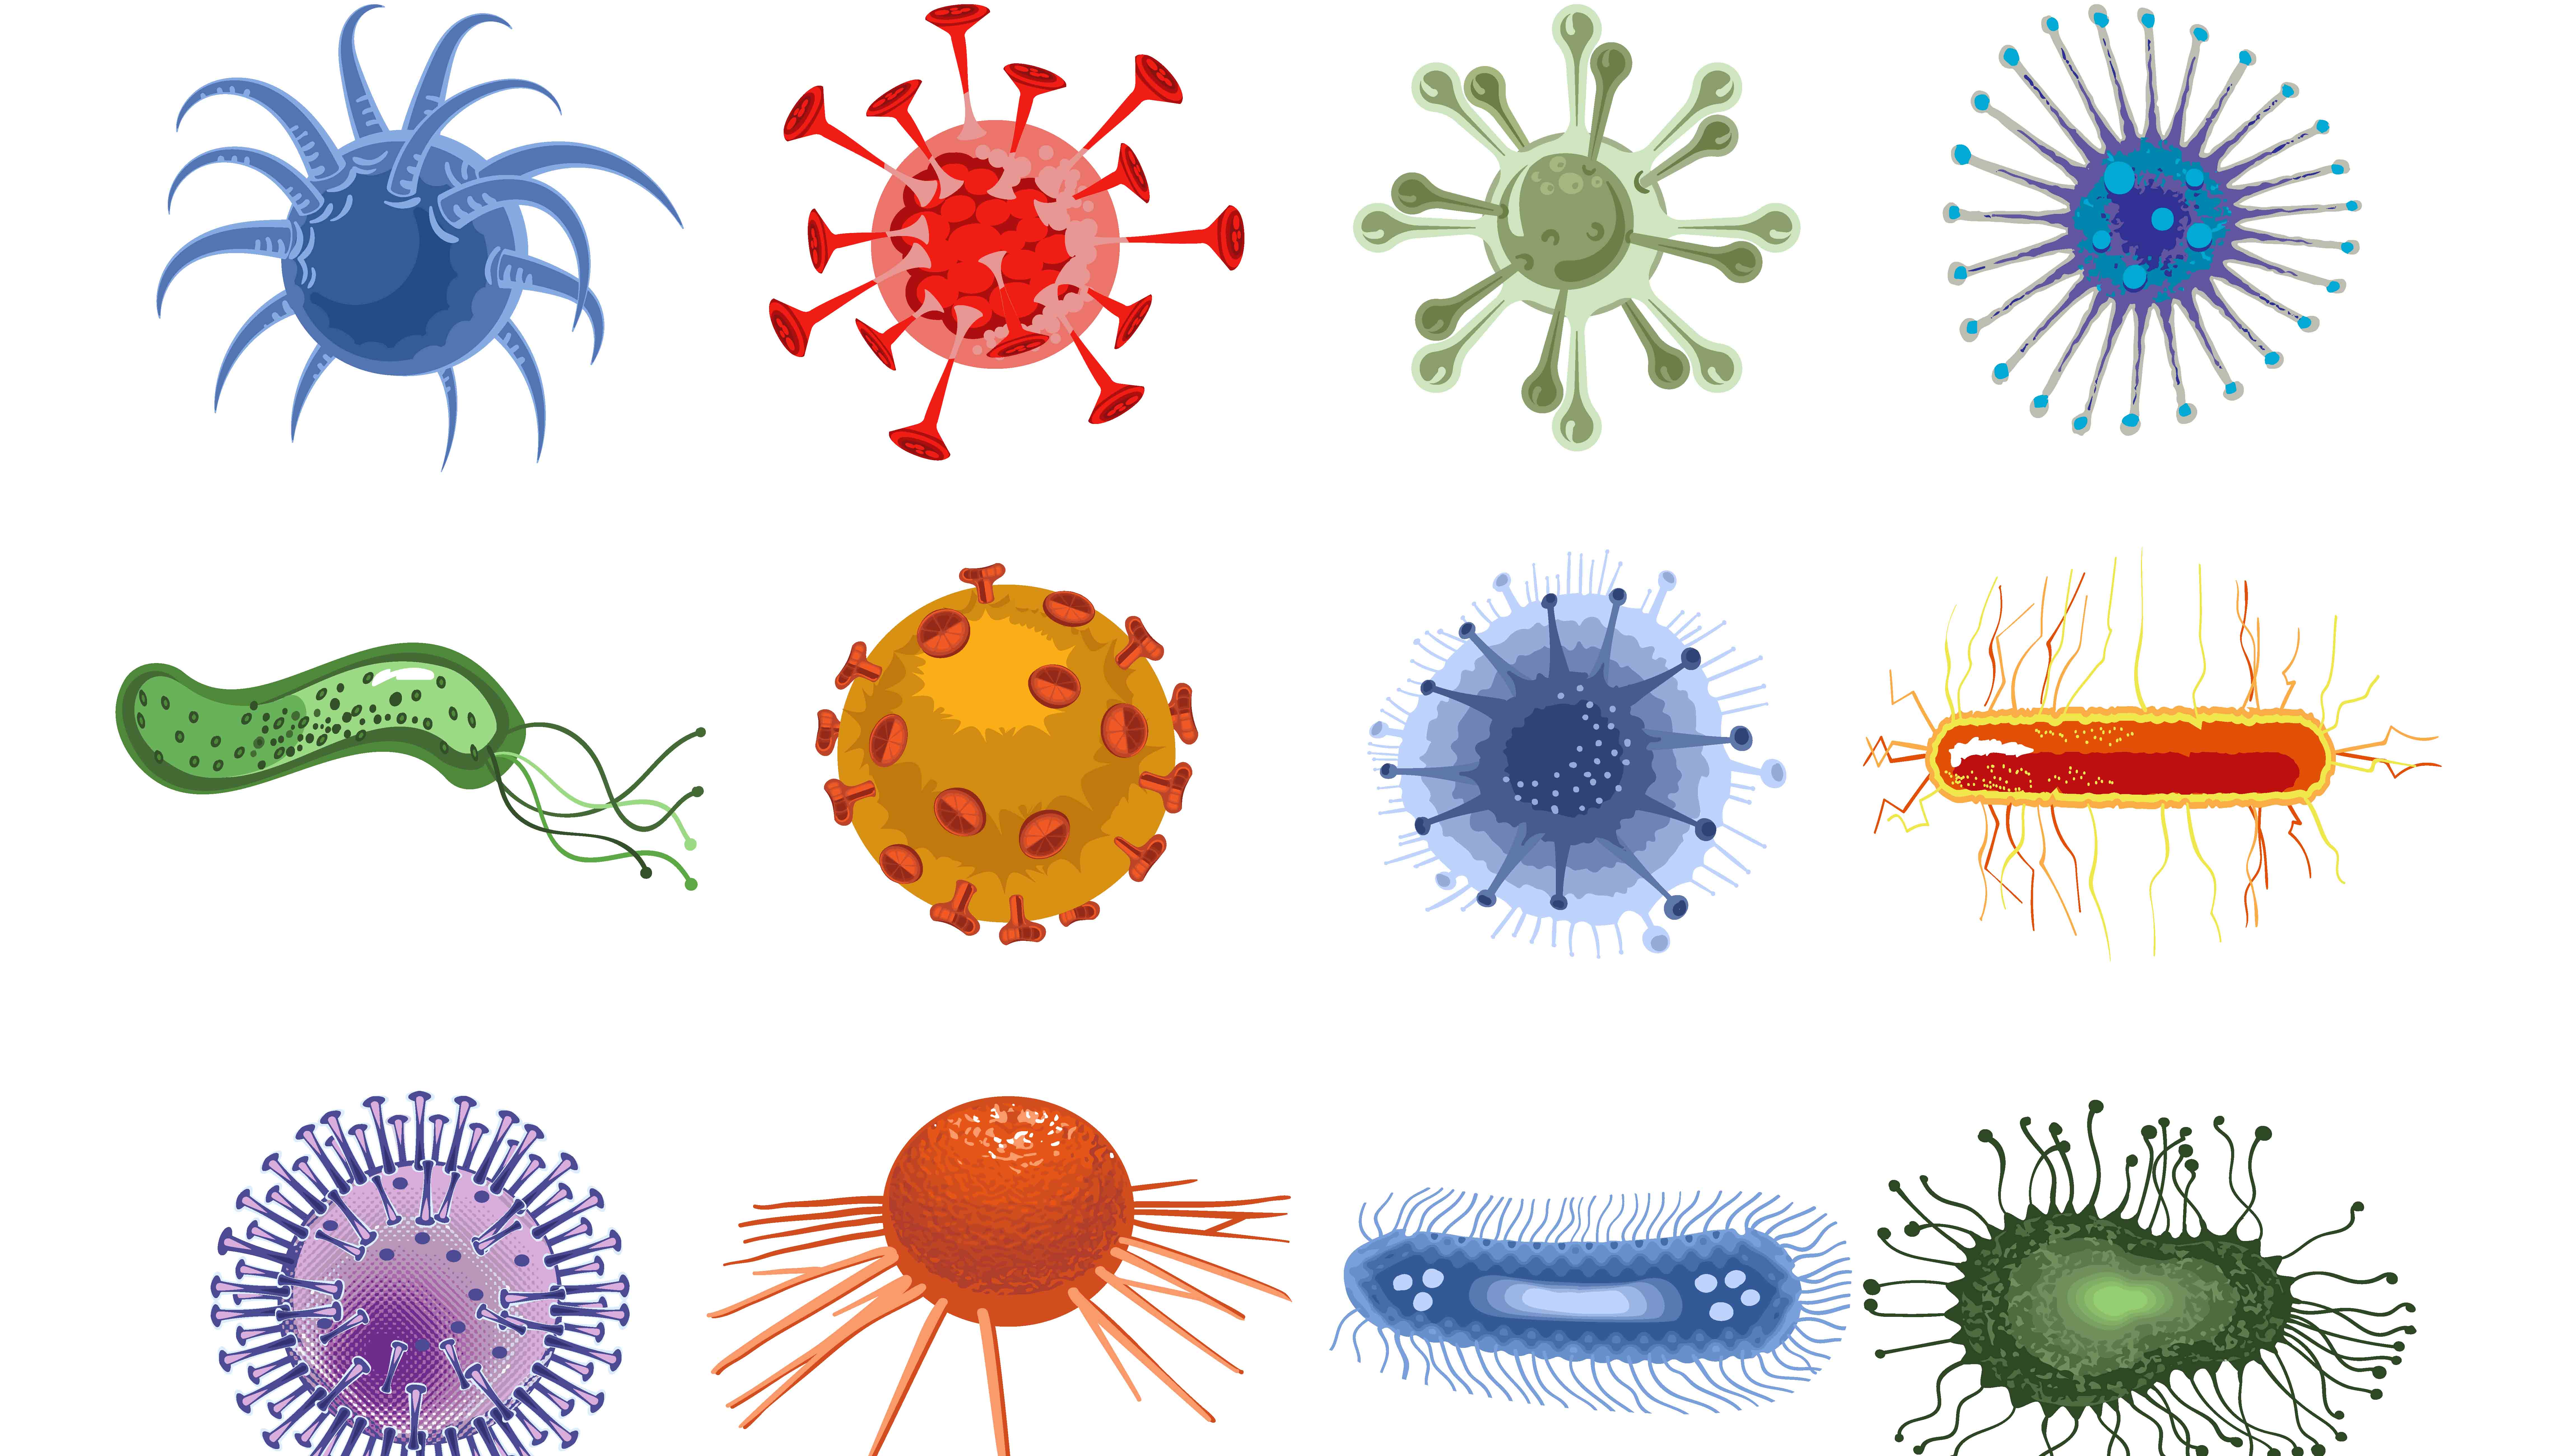 Whats The Difference Between Bacteria And Viruses Institute For Molecular Bioscience 